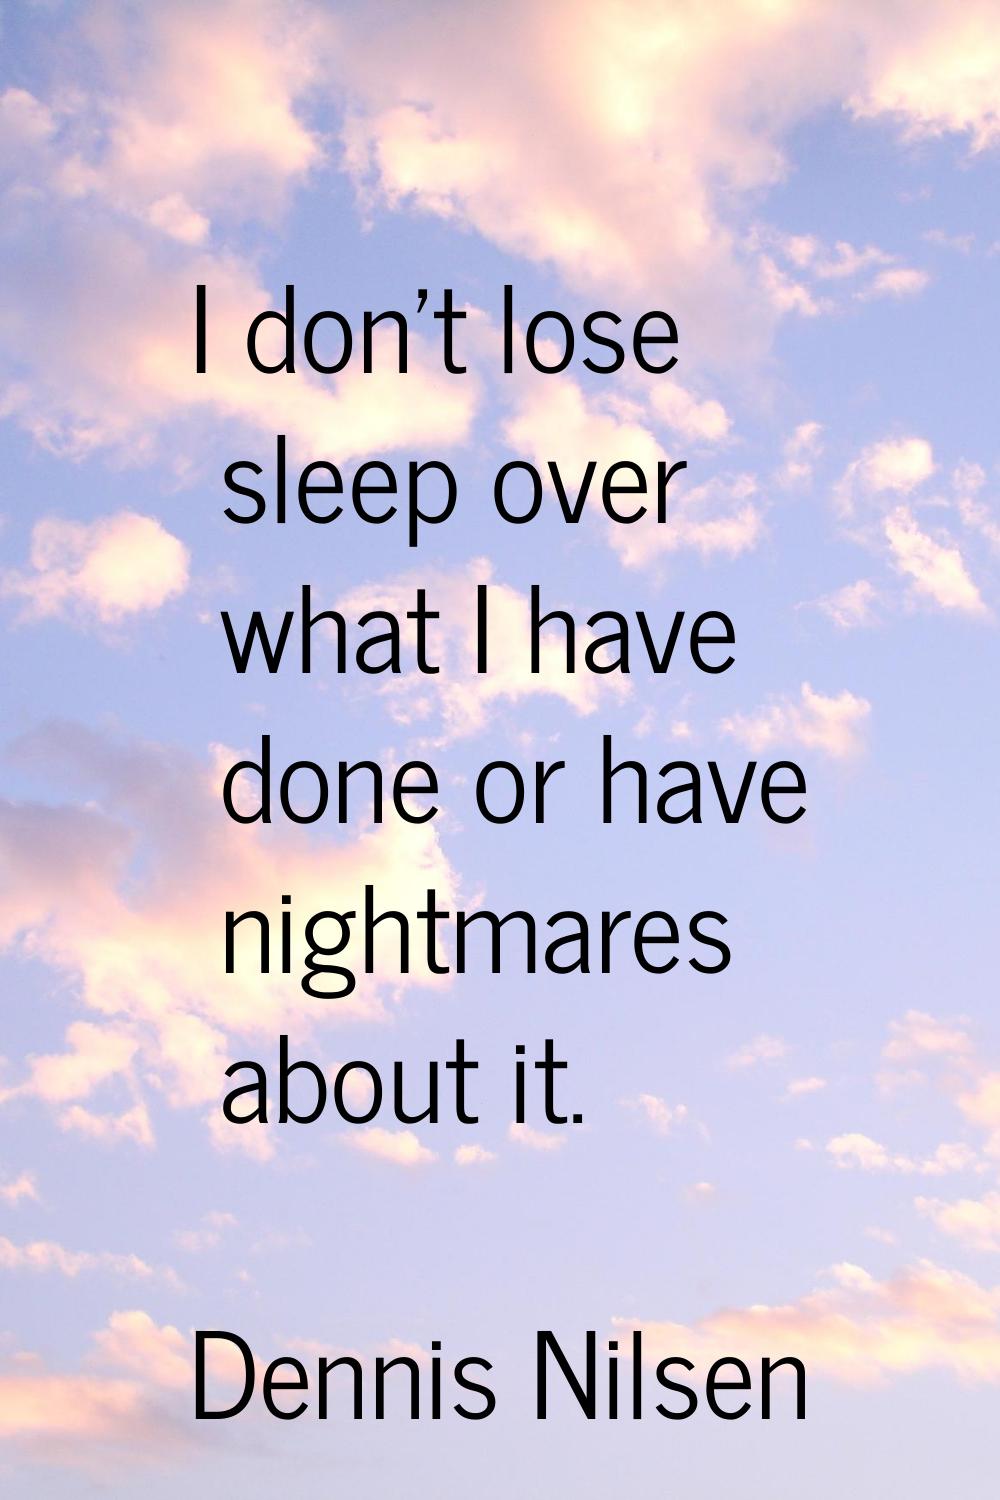 I don't lose sleep over what I have done or have nightmares about it.